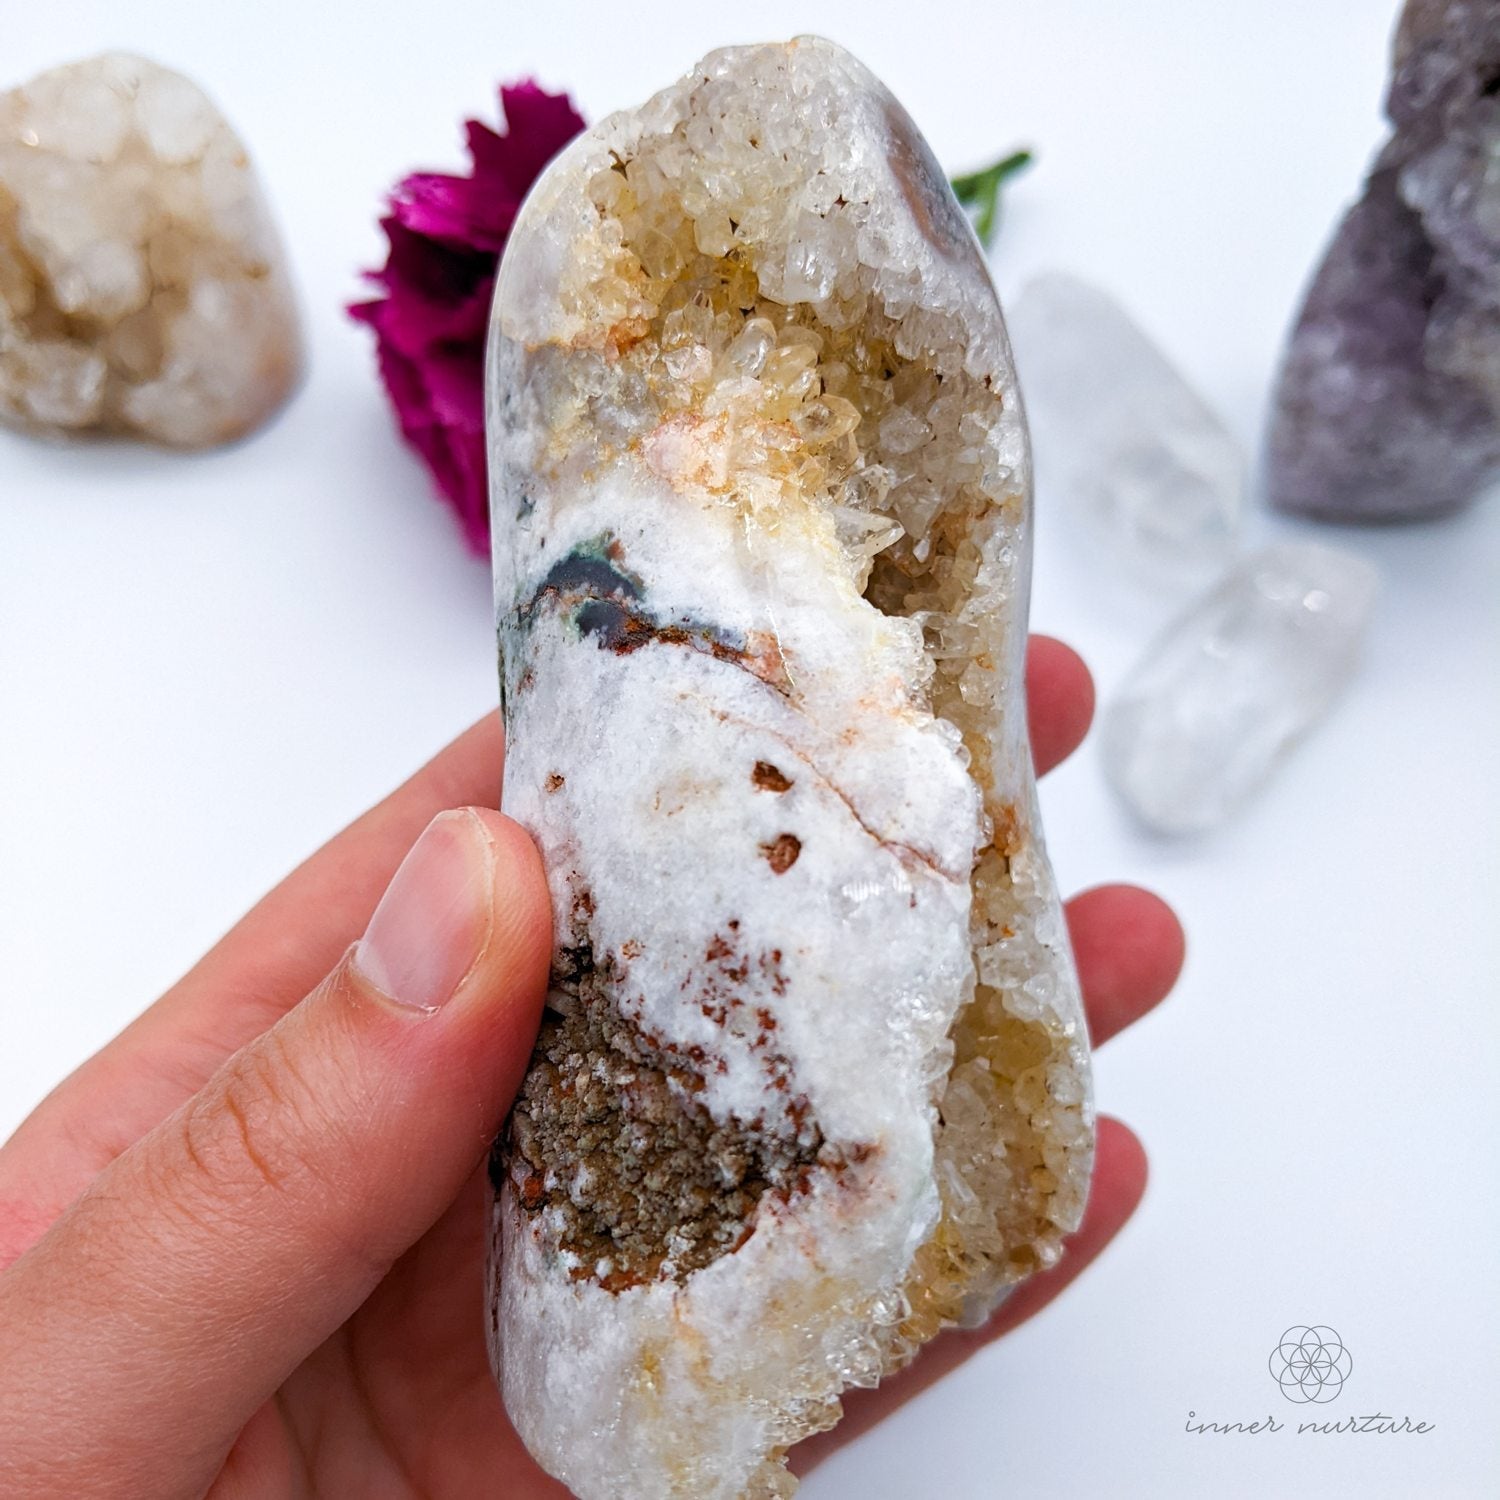 Pink Amethyst Free Form Cluster - 299g | Beautiful Healing Crystals Australia - Shop Online | Ethically Sourced